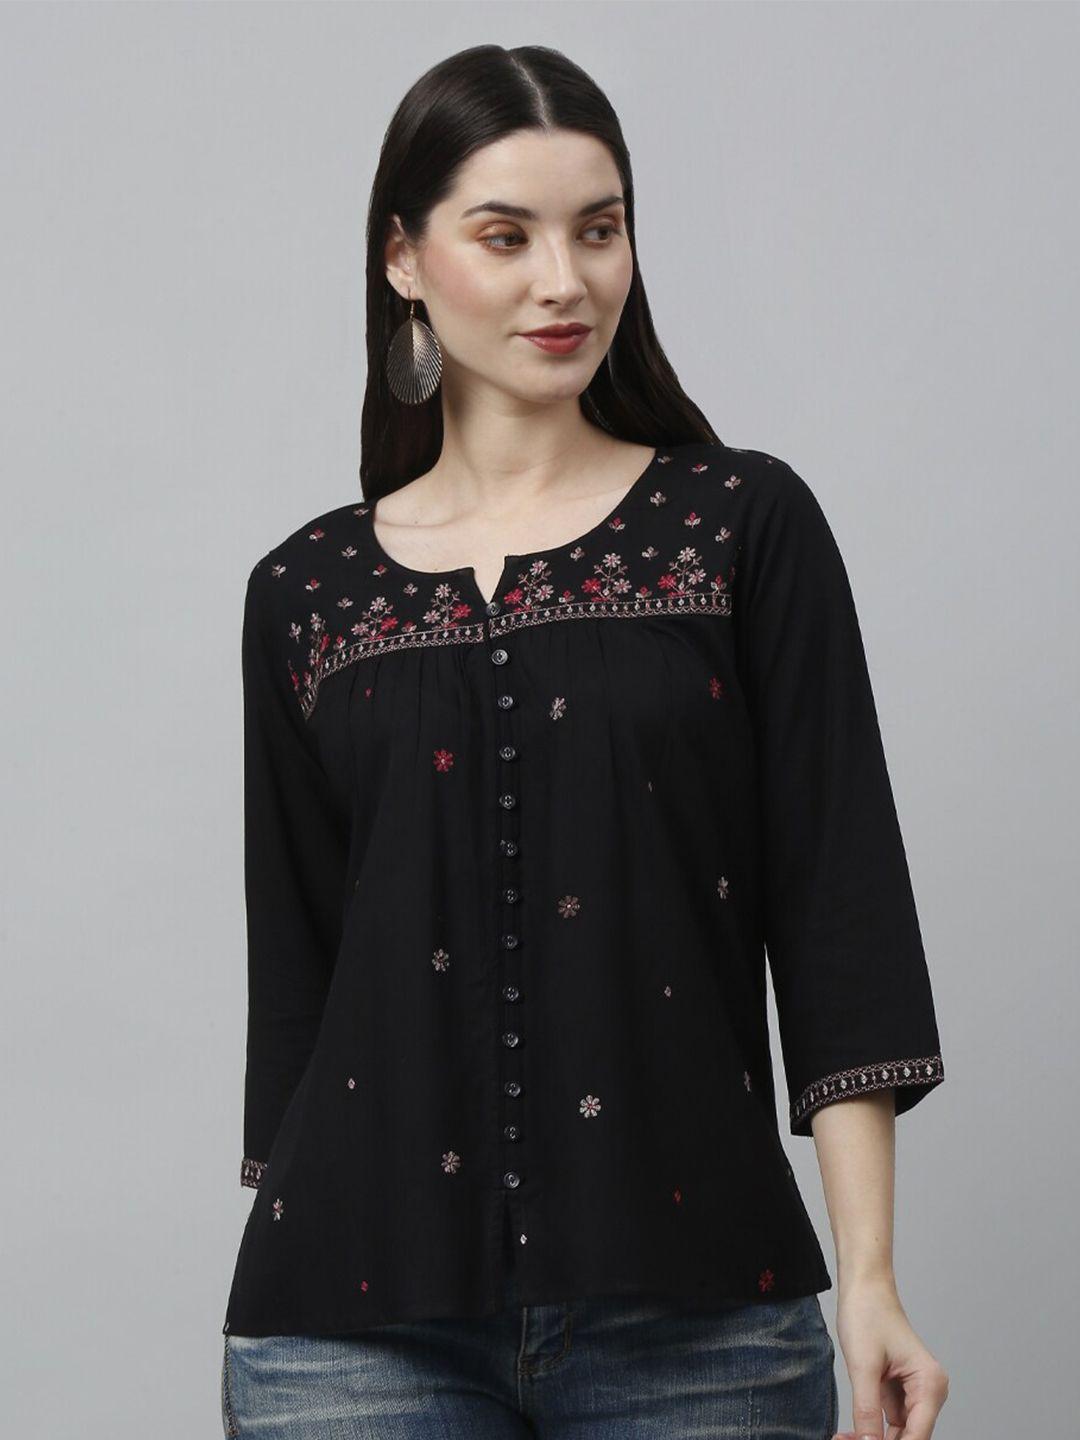 gracit floral embroidery round neck three-quarter sleeves top